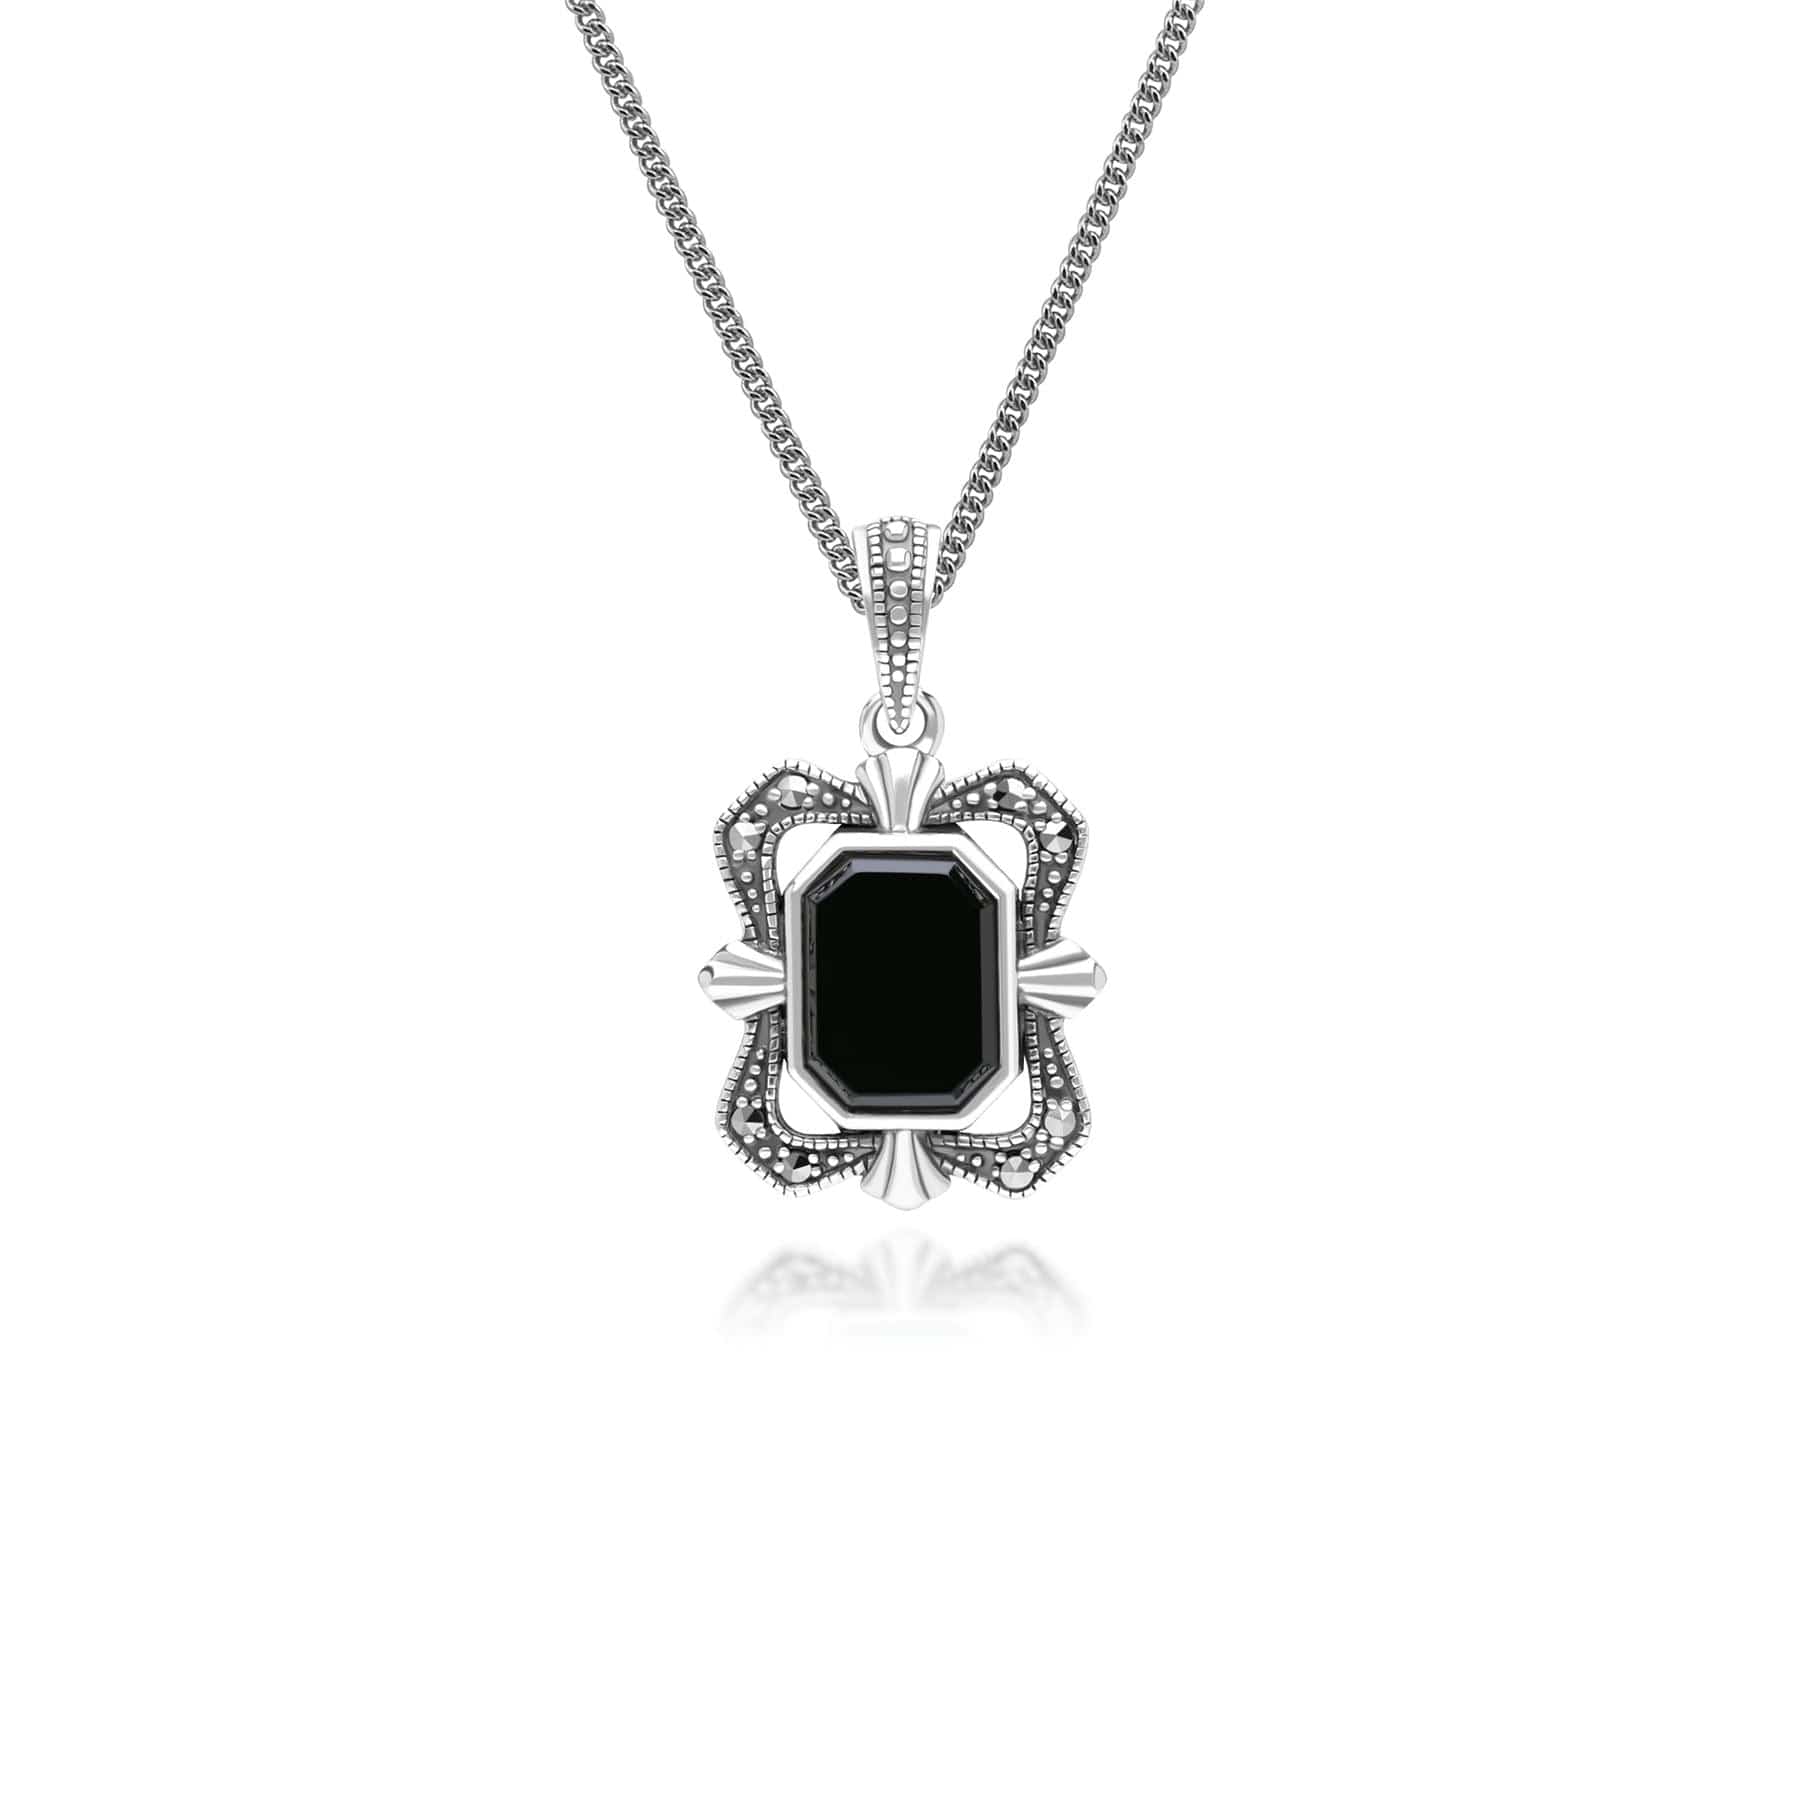 Art Deco Style Baguette Onyx and Marcasite Pendant Necklace in Sterling Silver 214P334502925 